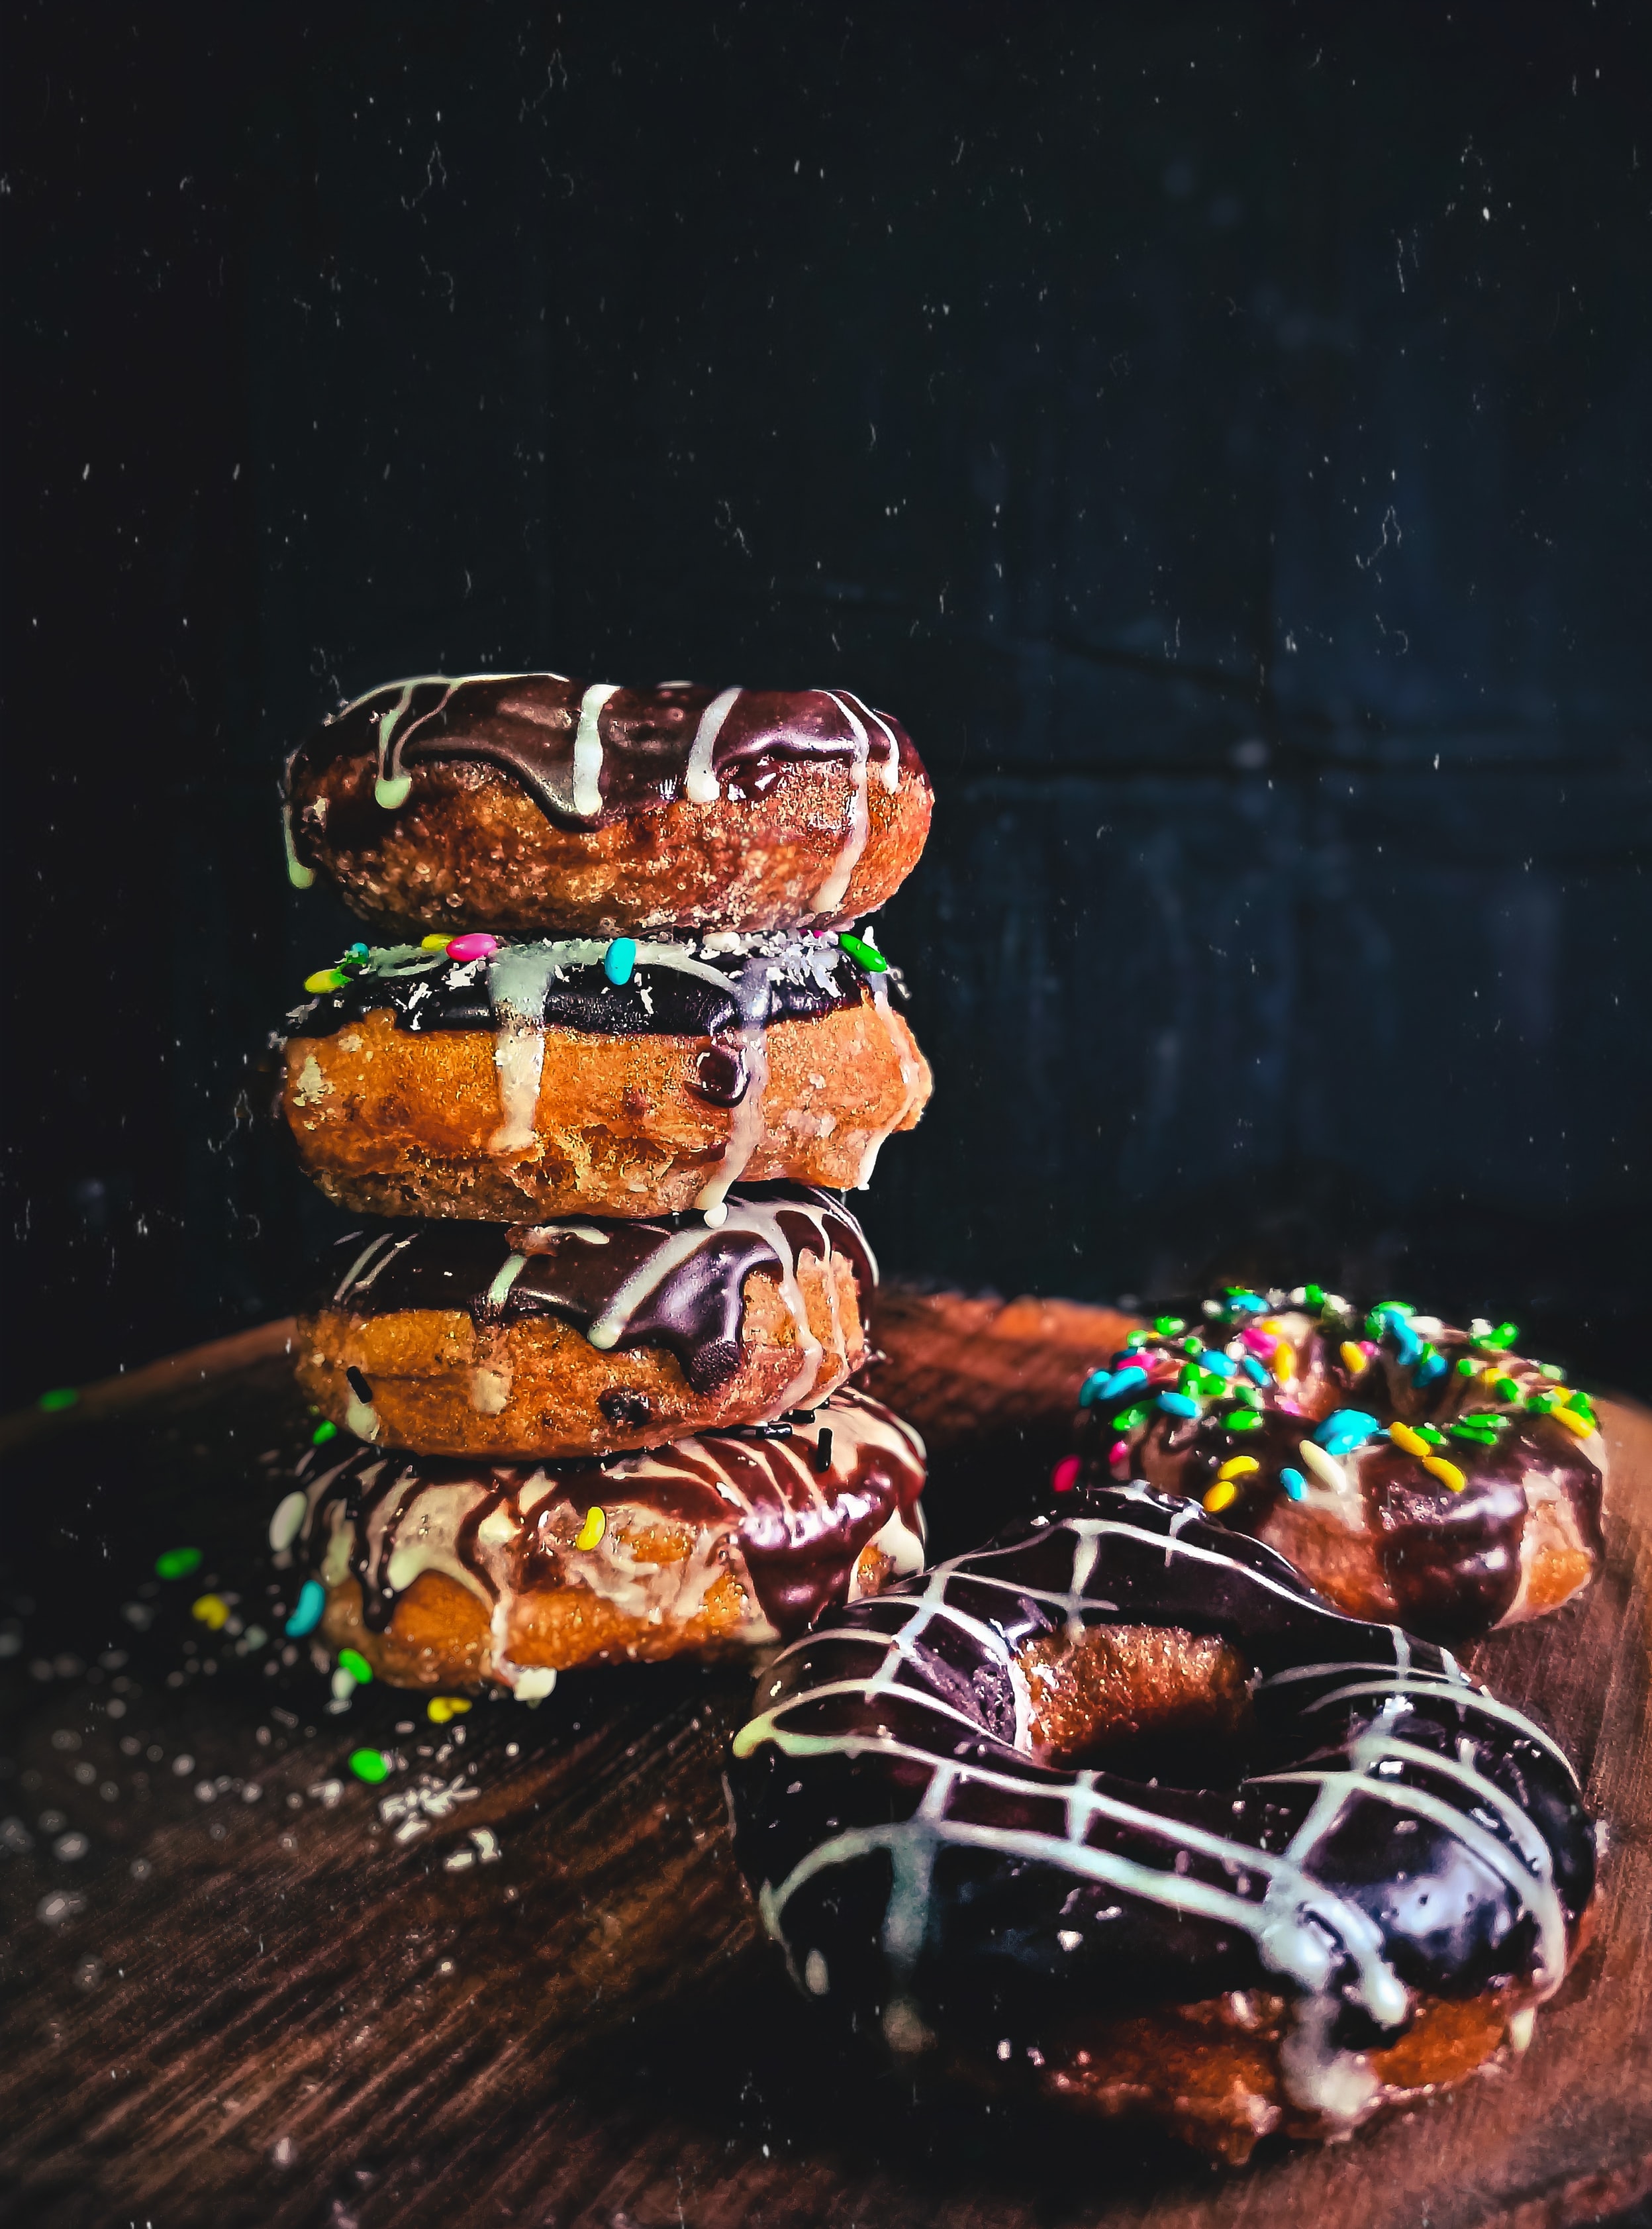 151971 Screensavers and Wallpapers Donuts for phone. Download food, chocolate, desert, donuts, sprinkling, sprinkle pictures for free